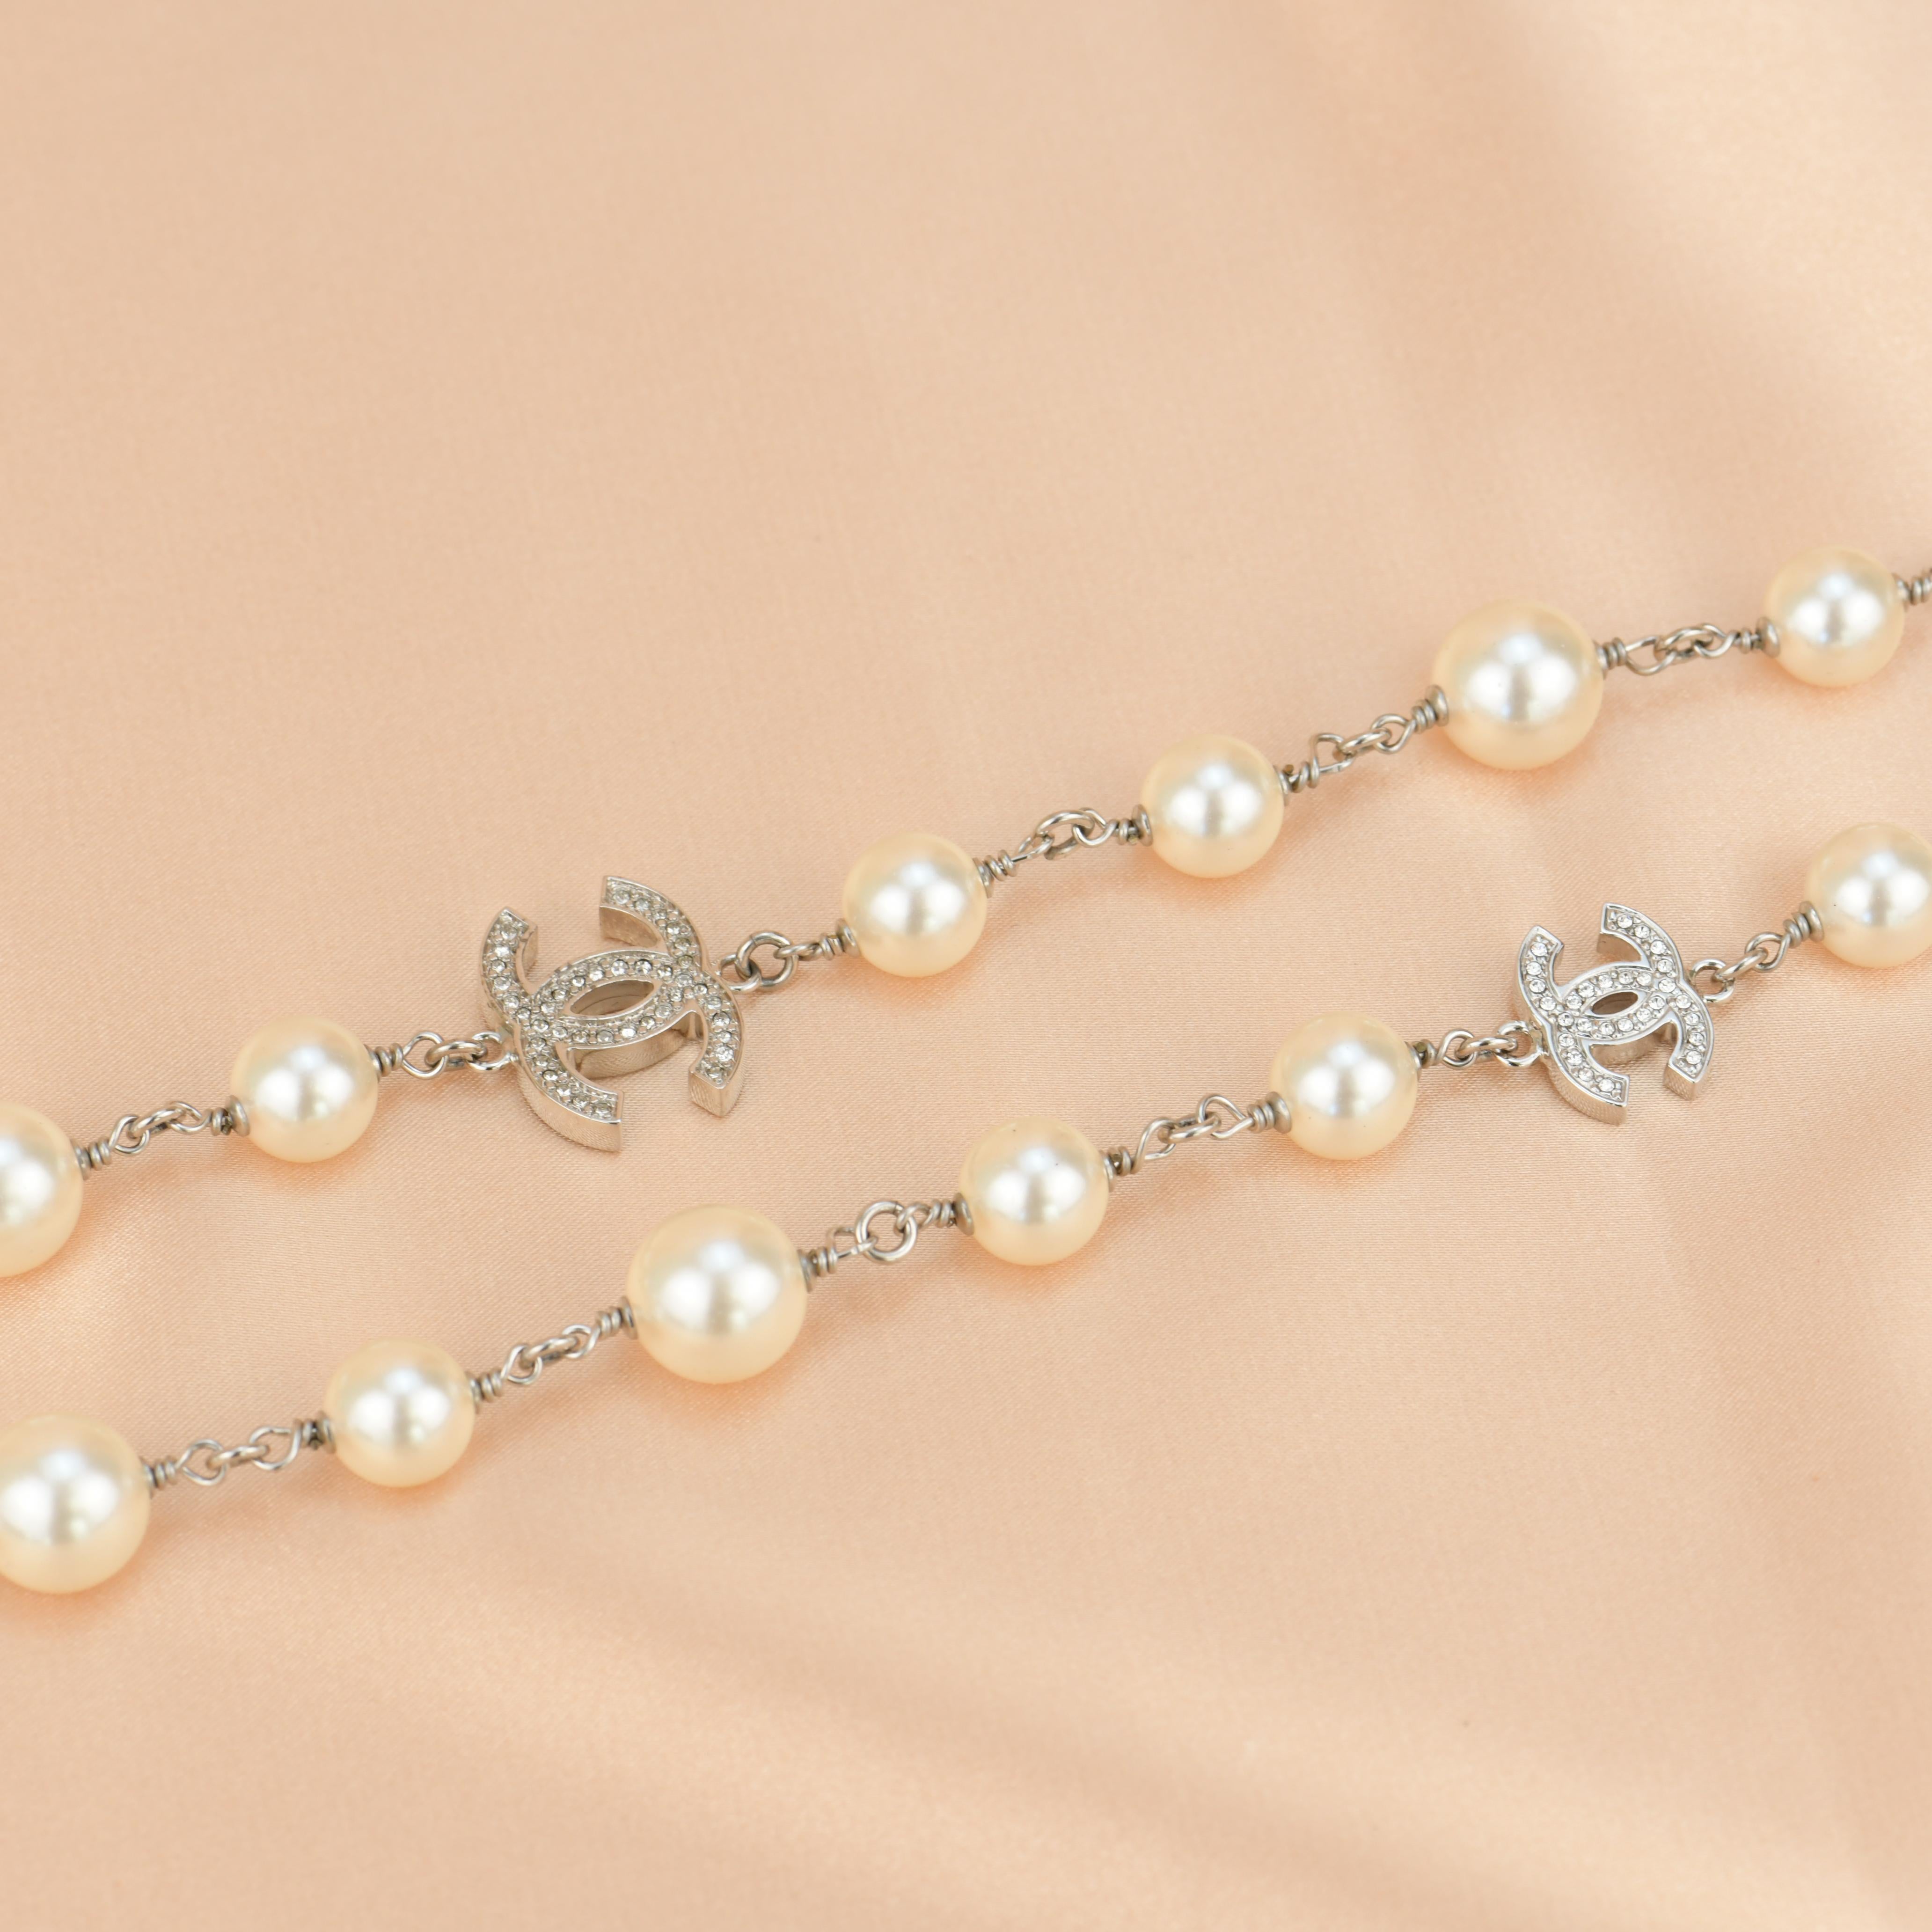 Chanel Pearl Sautoir Necklace with Five CC Logos 5